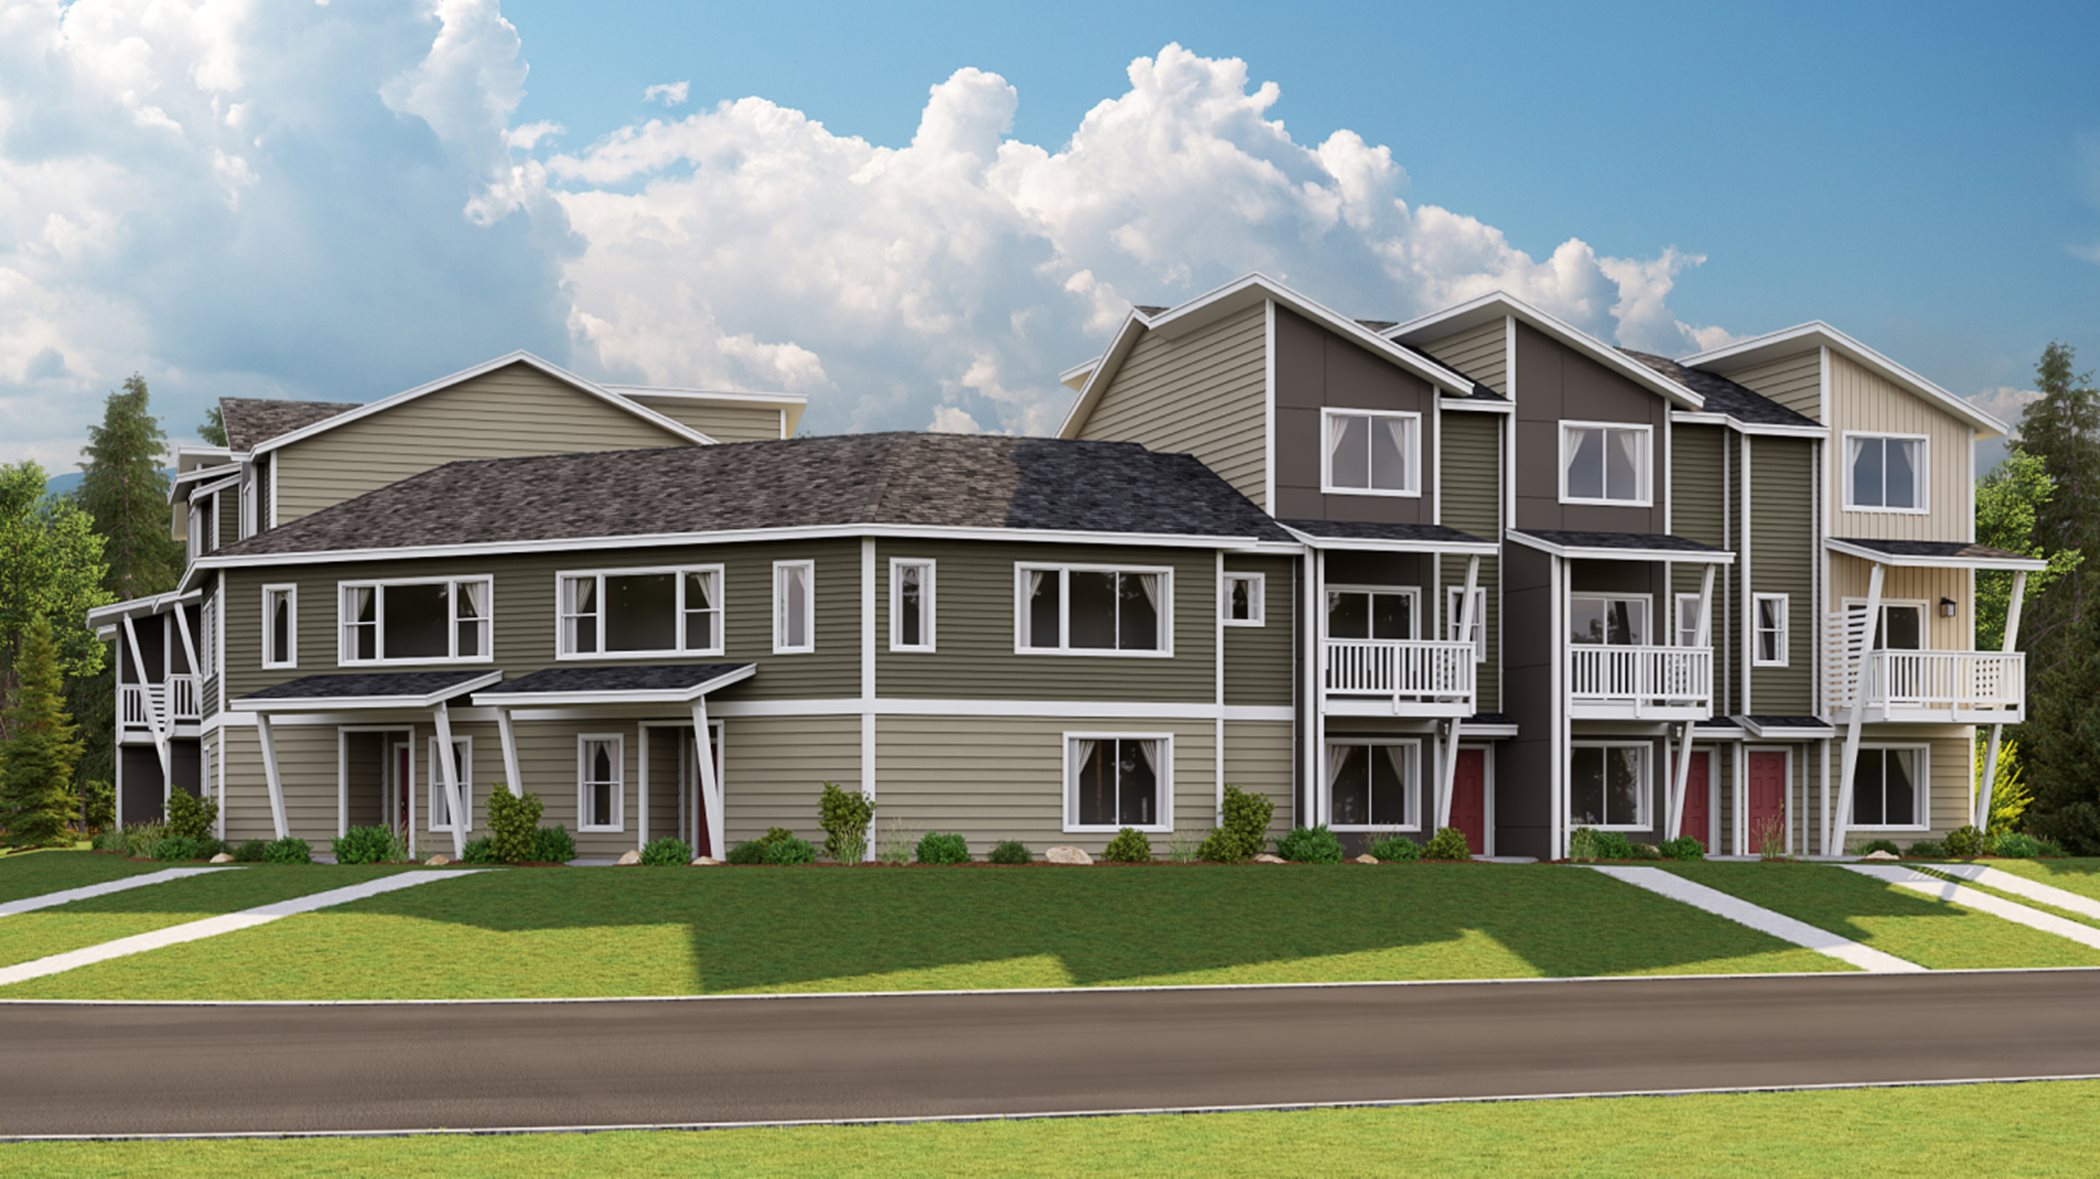 Image of townhomes